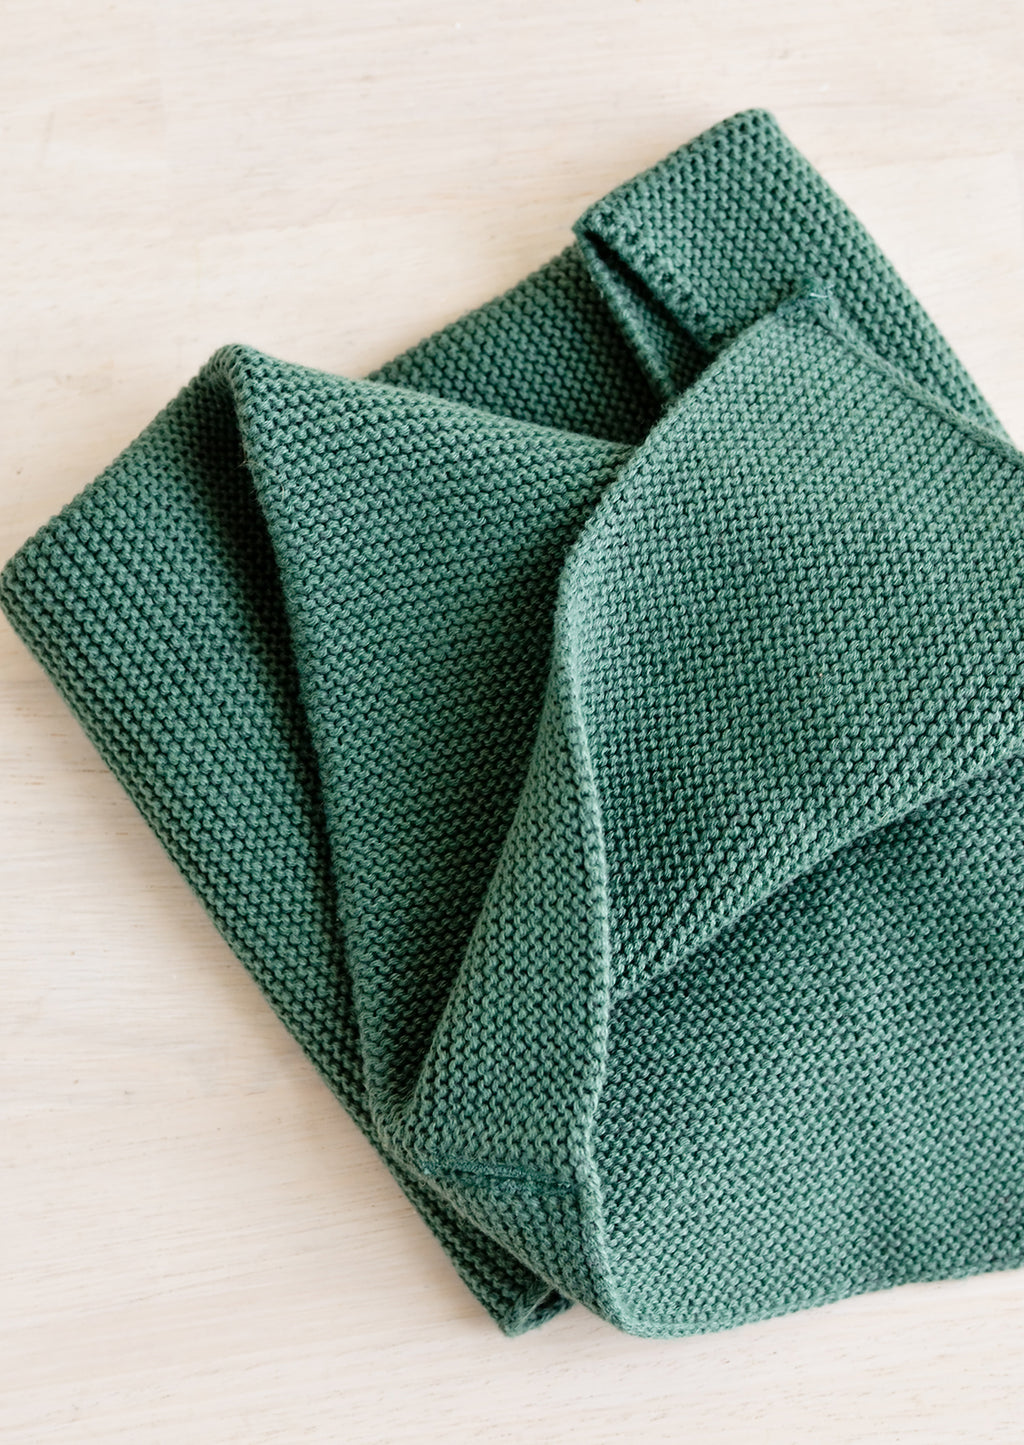 Spruce: A knit cotton dish towel in spruce green.